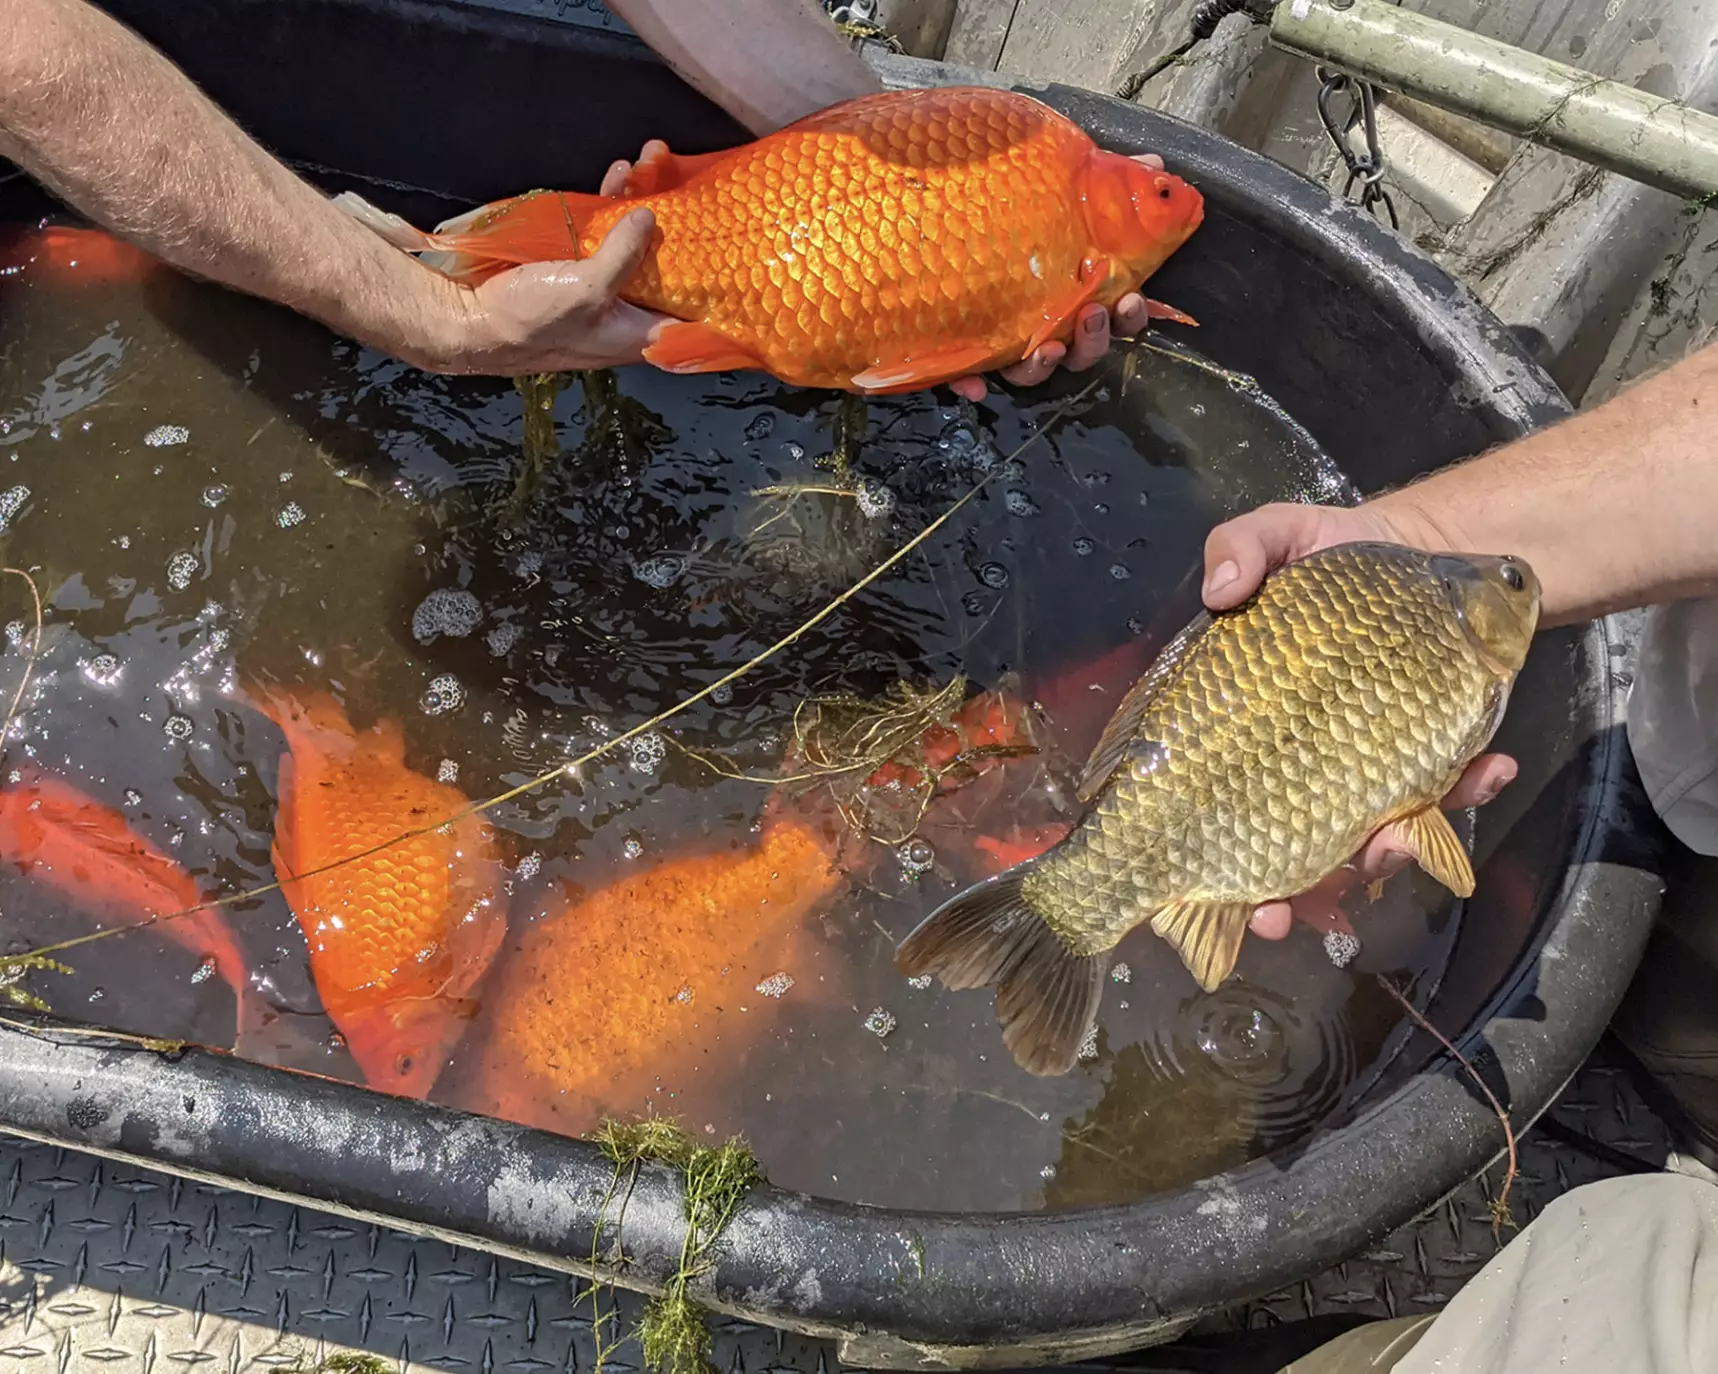 Experts have now issued a warning against releasing goldfish into the wild (